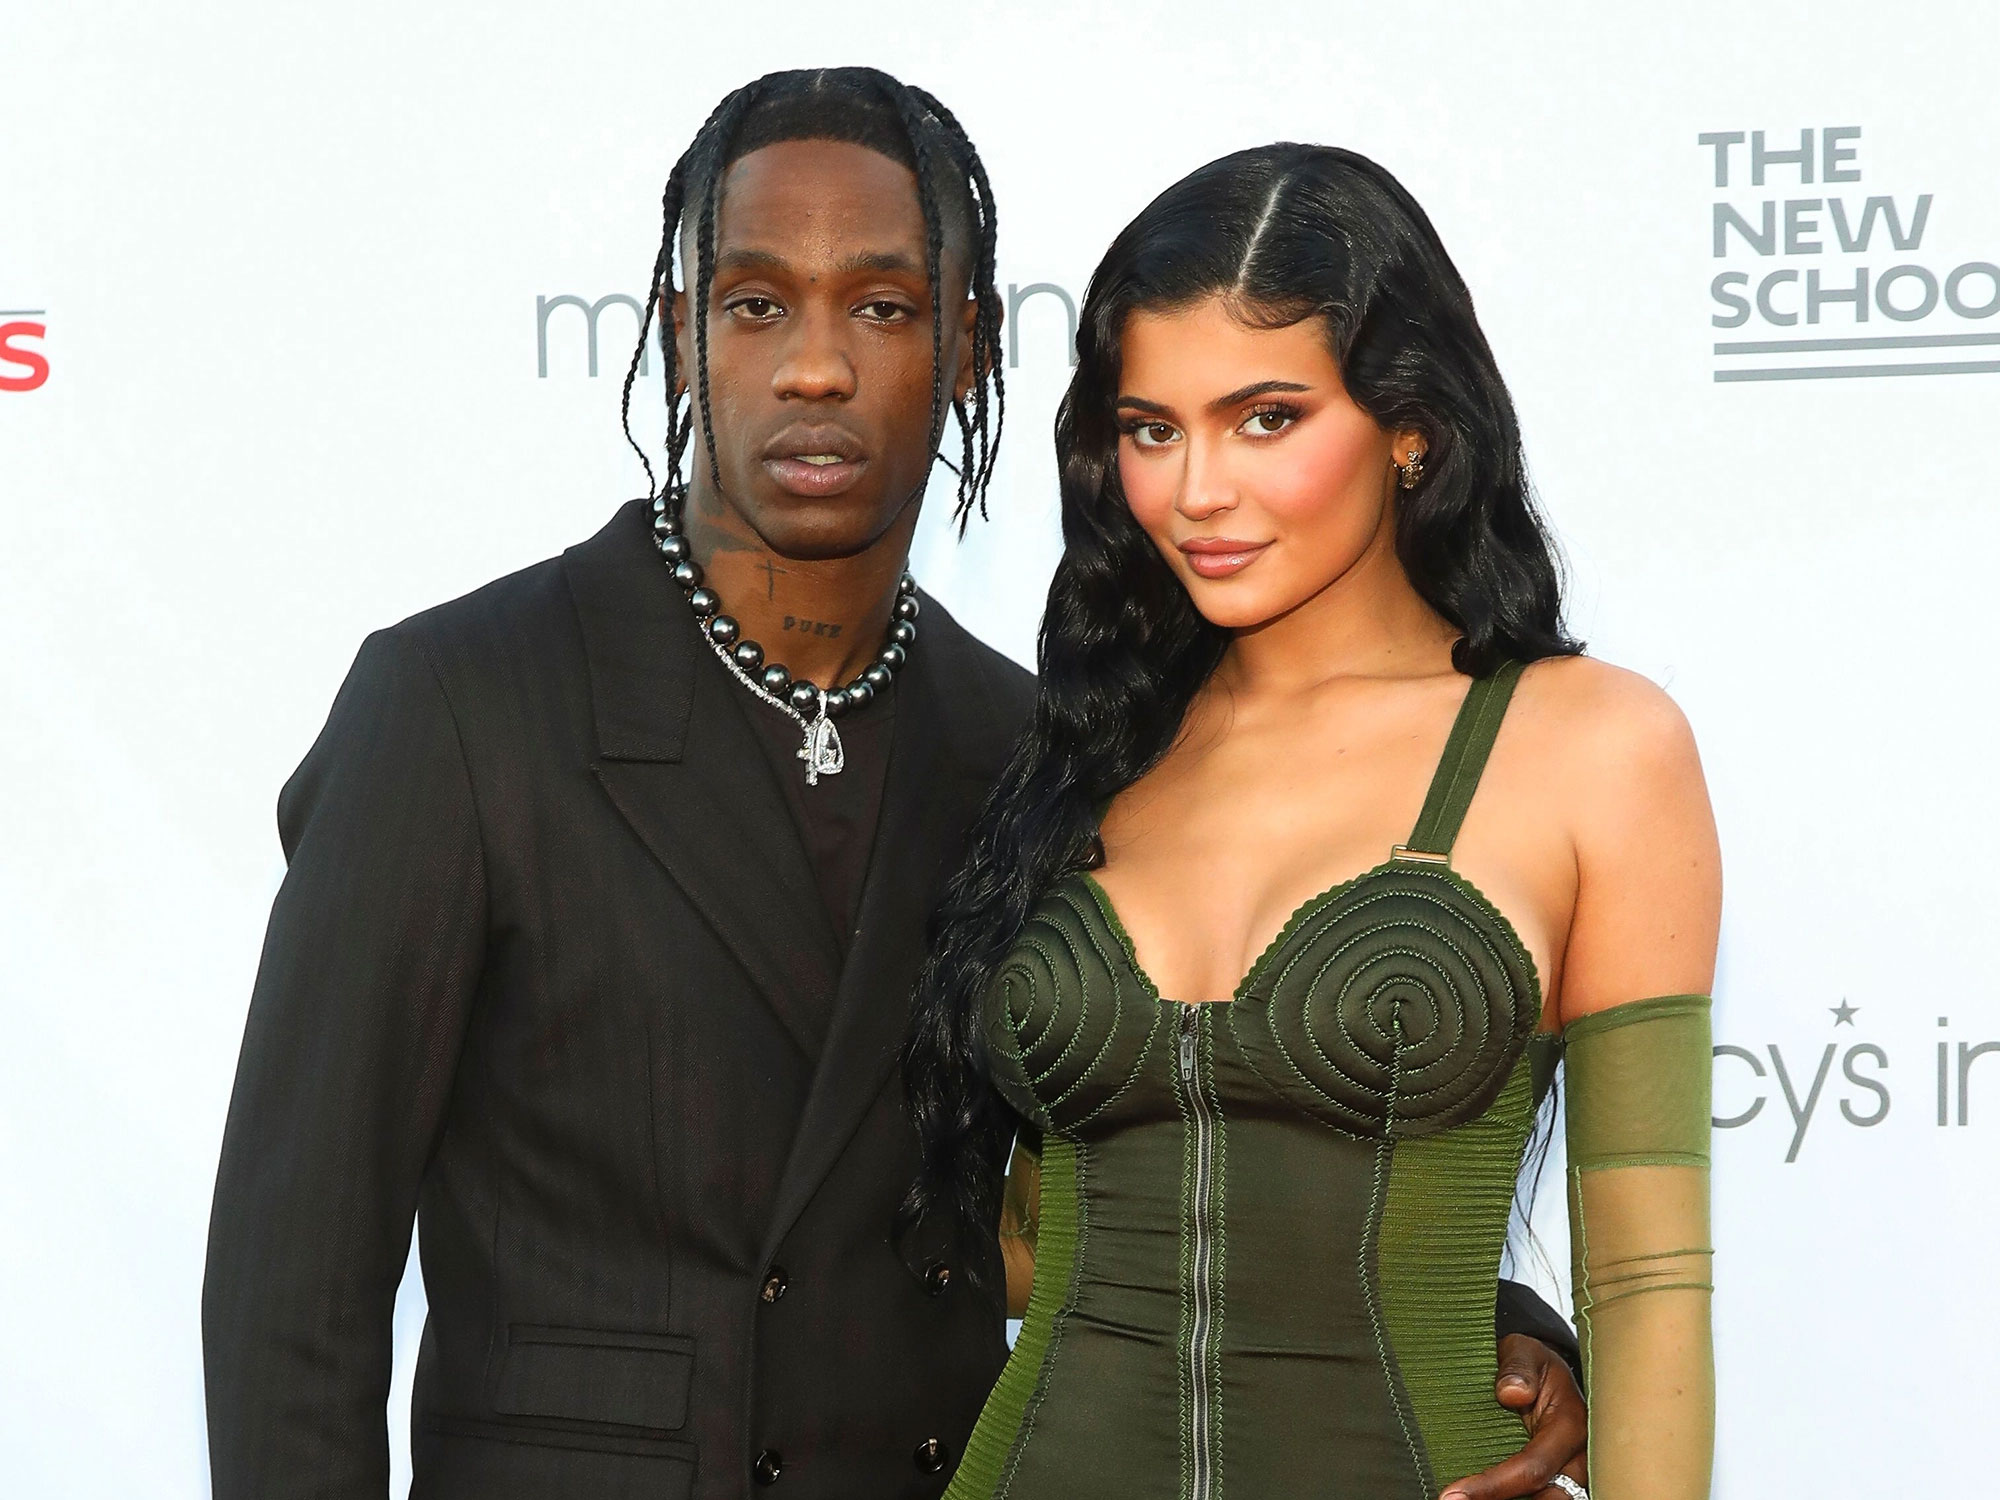 https://www.usmagazine.com/wp-content/uploads/2022/05/Every-Glimpse-Kylie-Jenner-Has-Shown-of-Her-Son-With-Travis-Scott.jpg?quality=86&strip=all